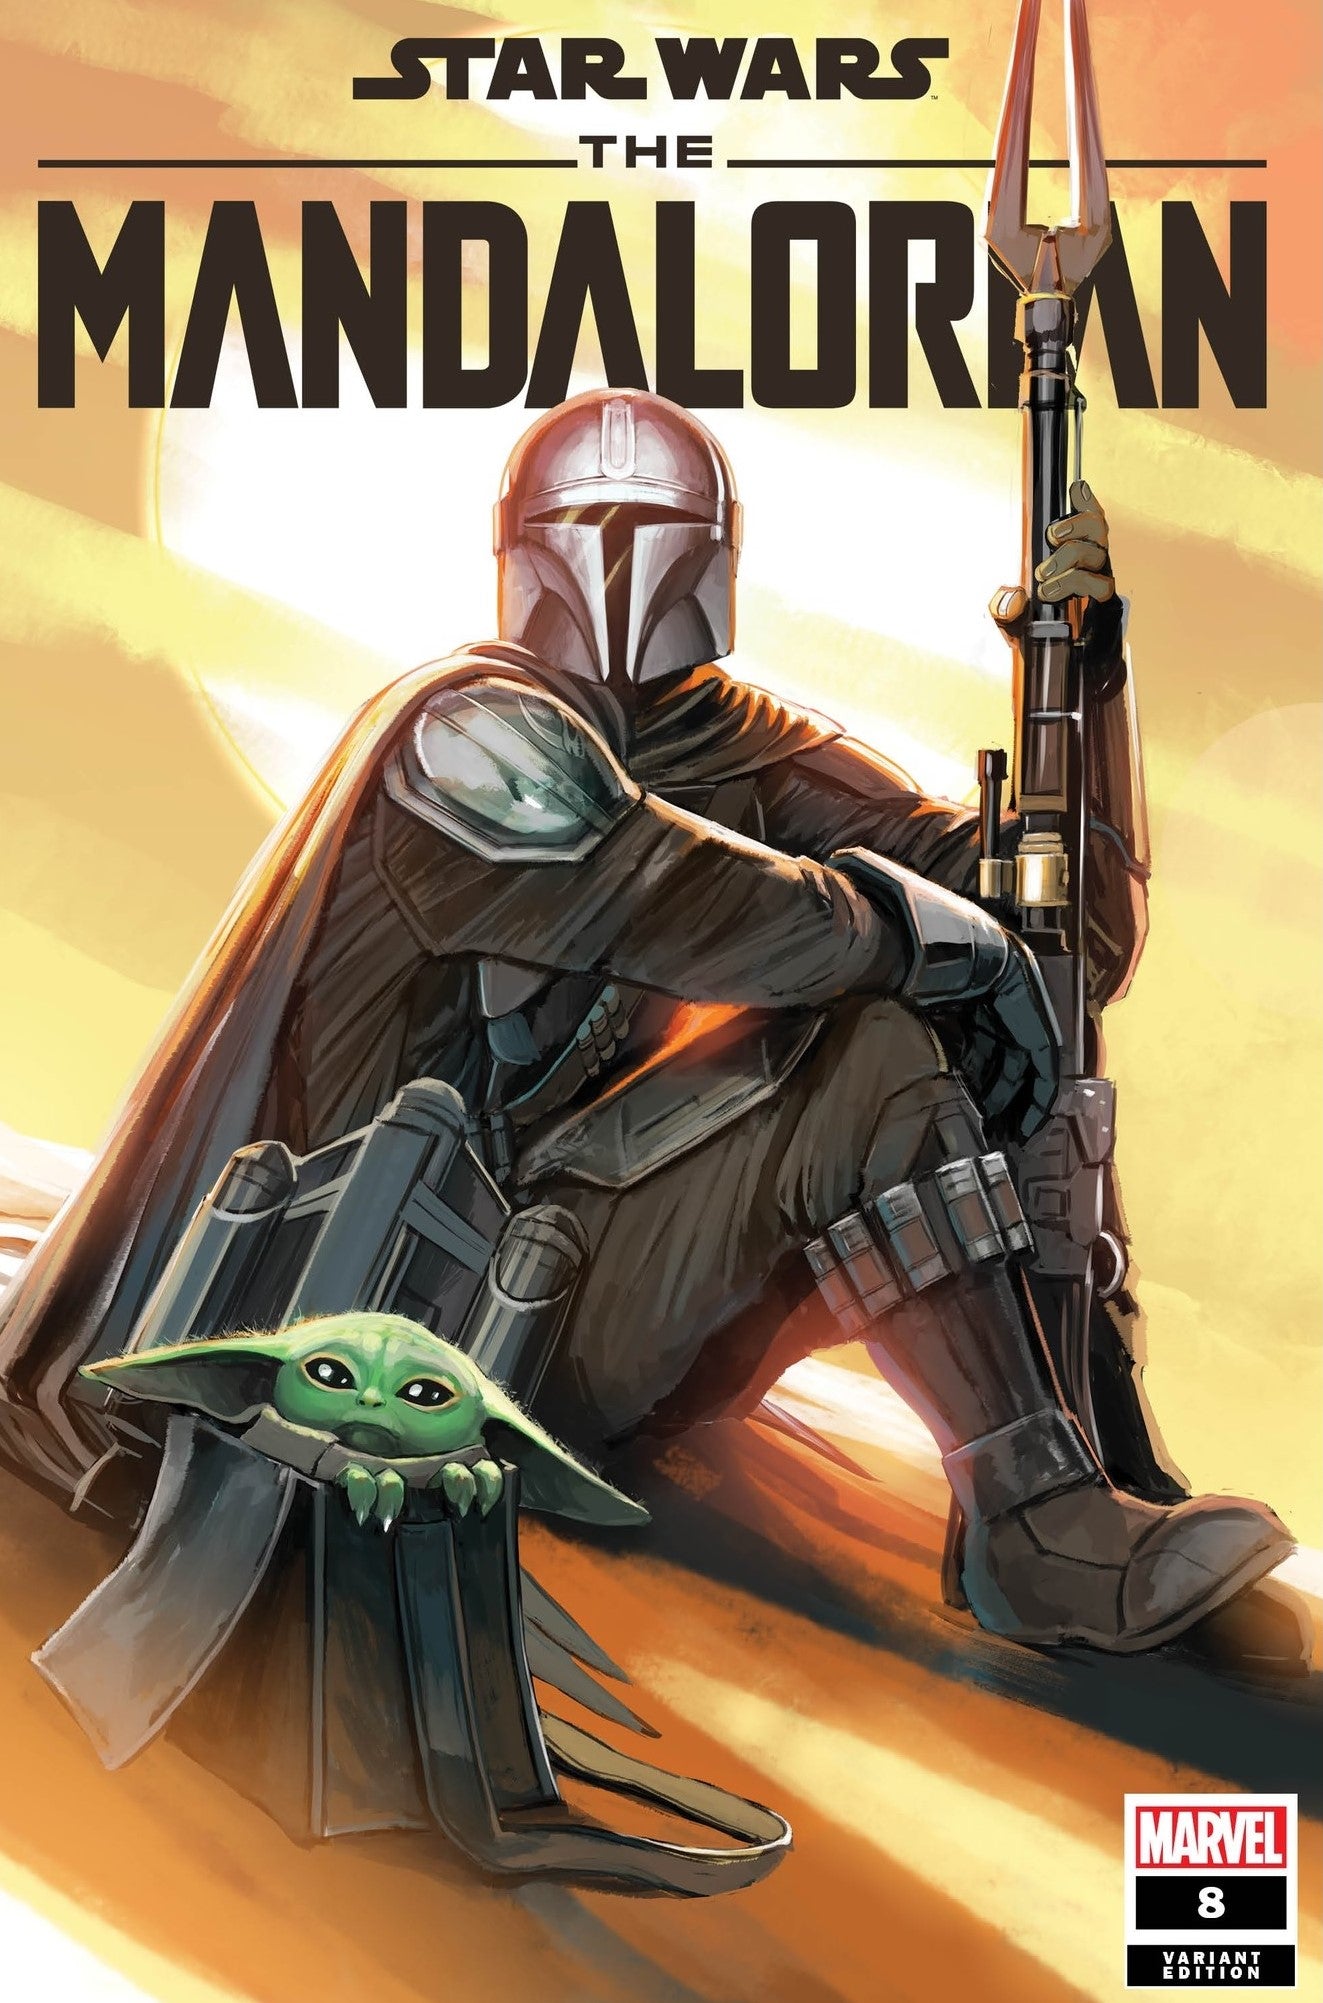 STAR WARS MANDALORIAN #8 STEPHANIE HANS VARIANT LIMITED TO 800 COPIES WITH NUMBERED COA